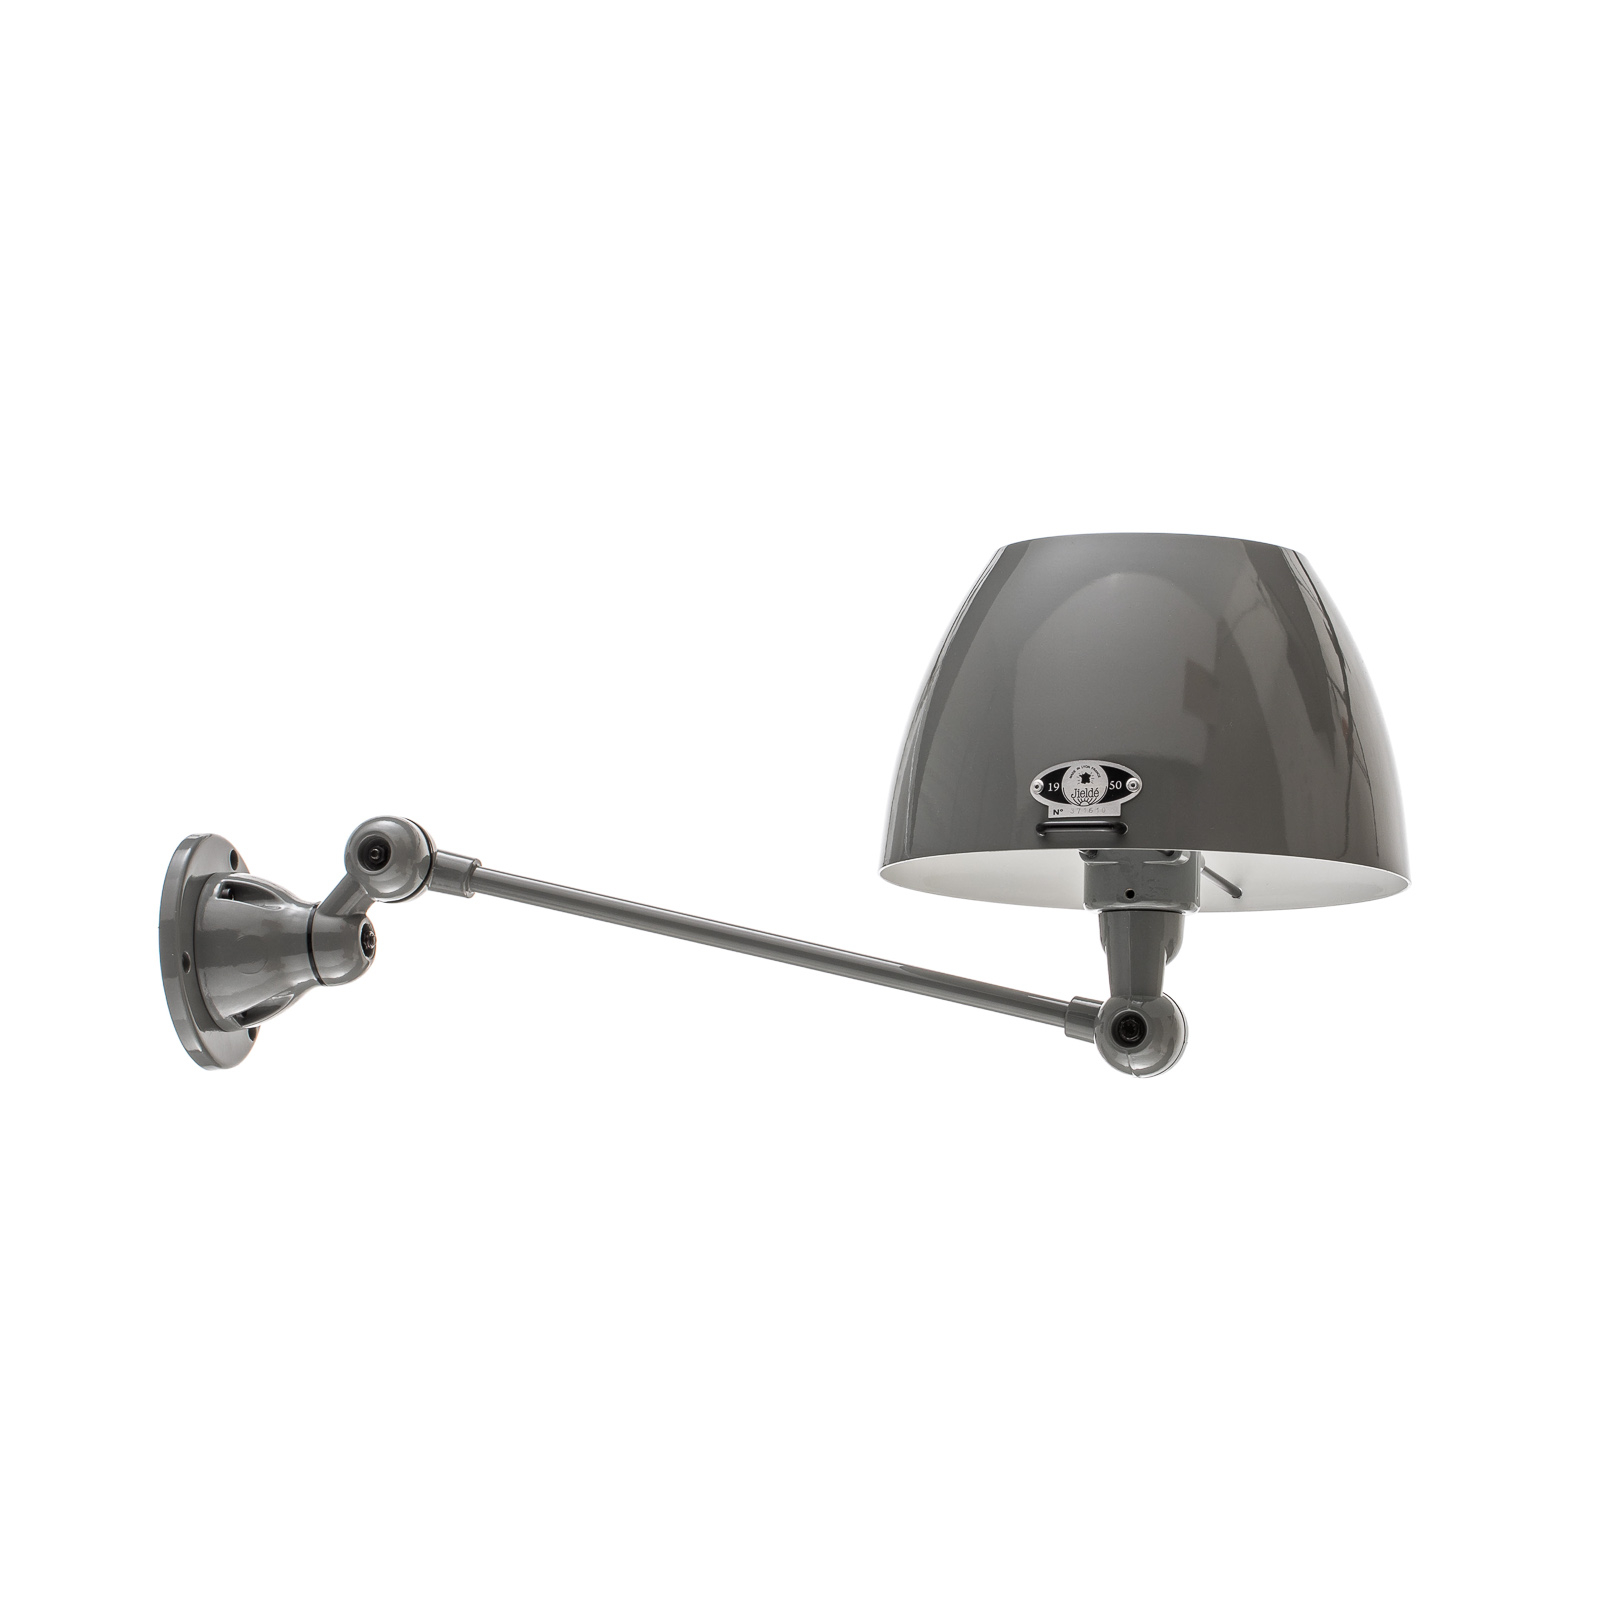 Aicler AIC301 wall lamp articulated arm grey